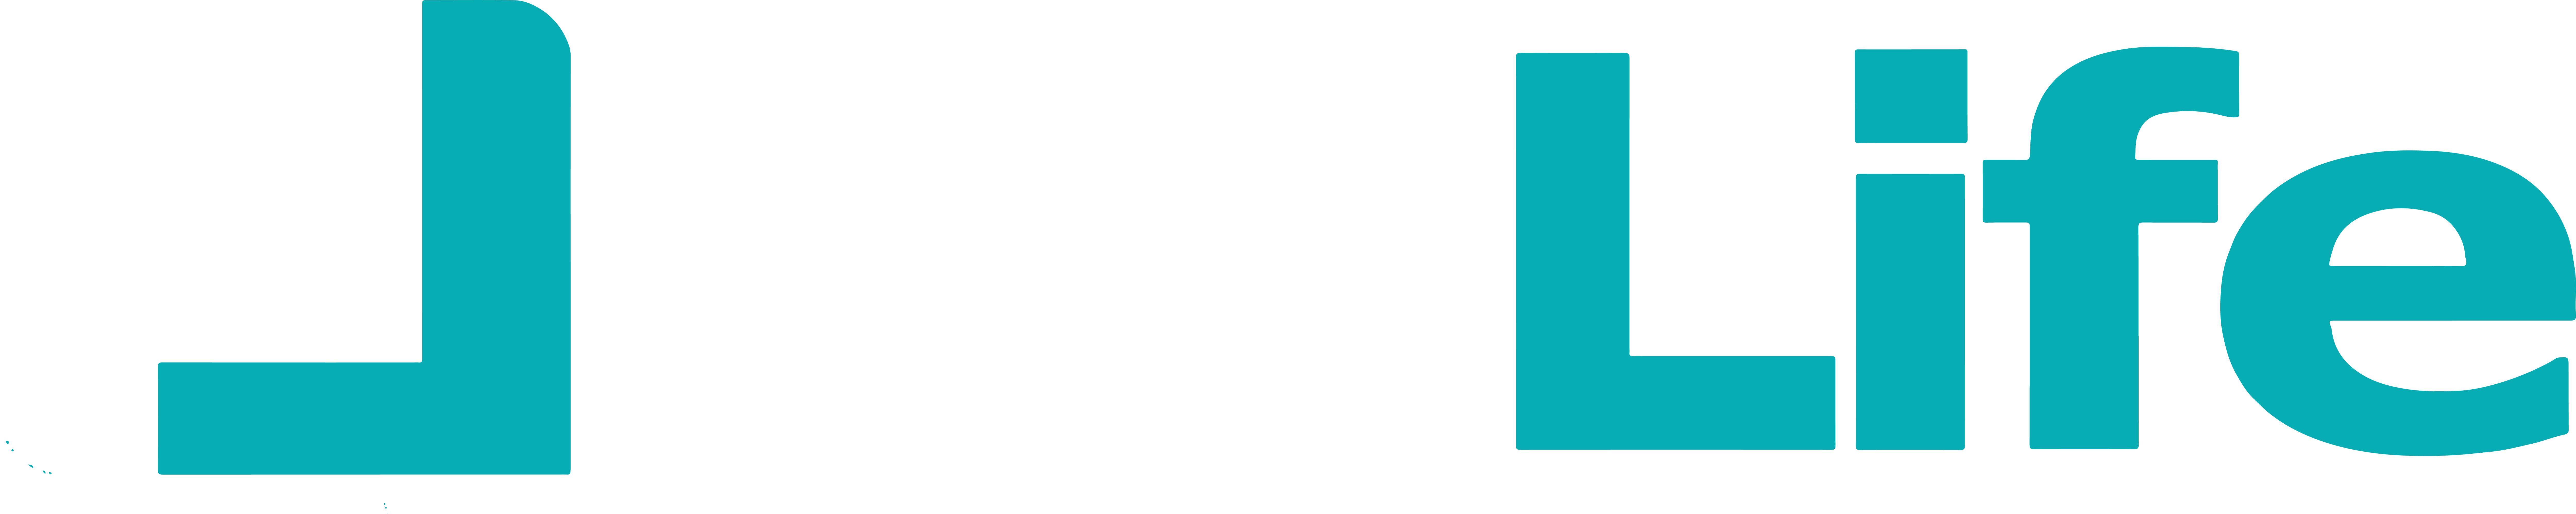 FitLife